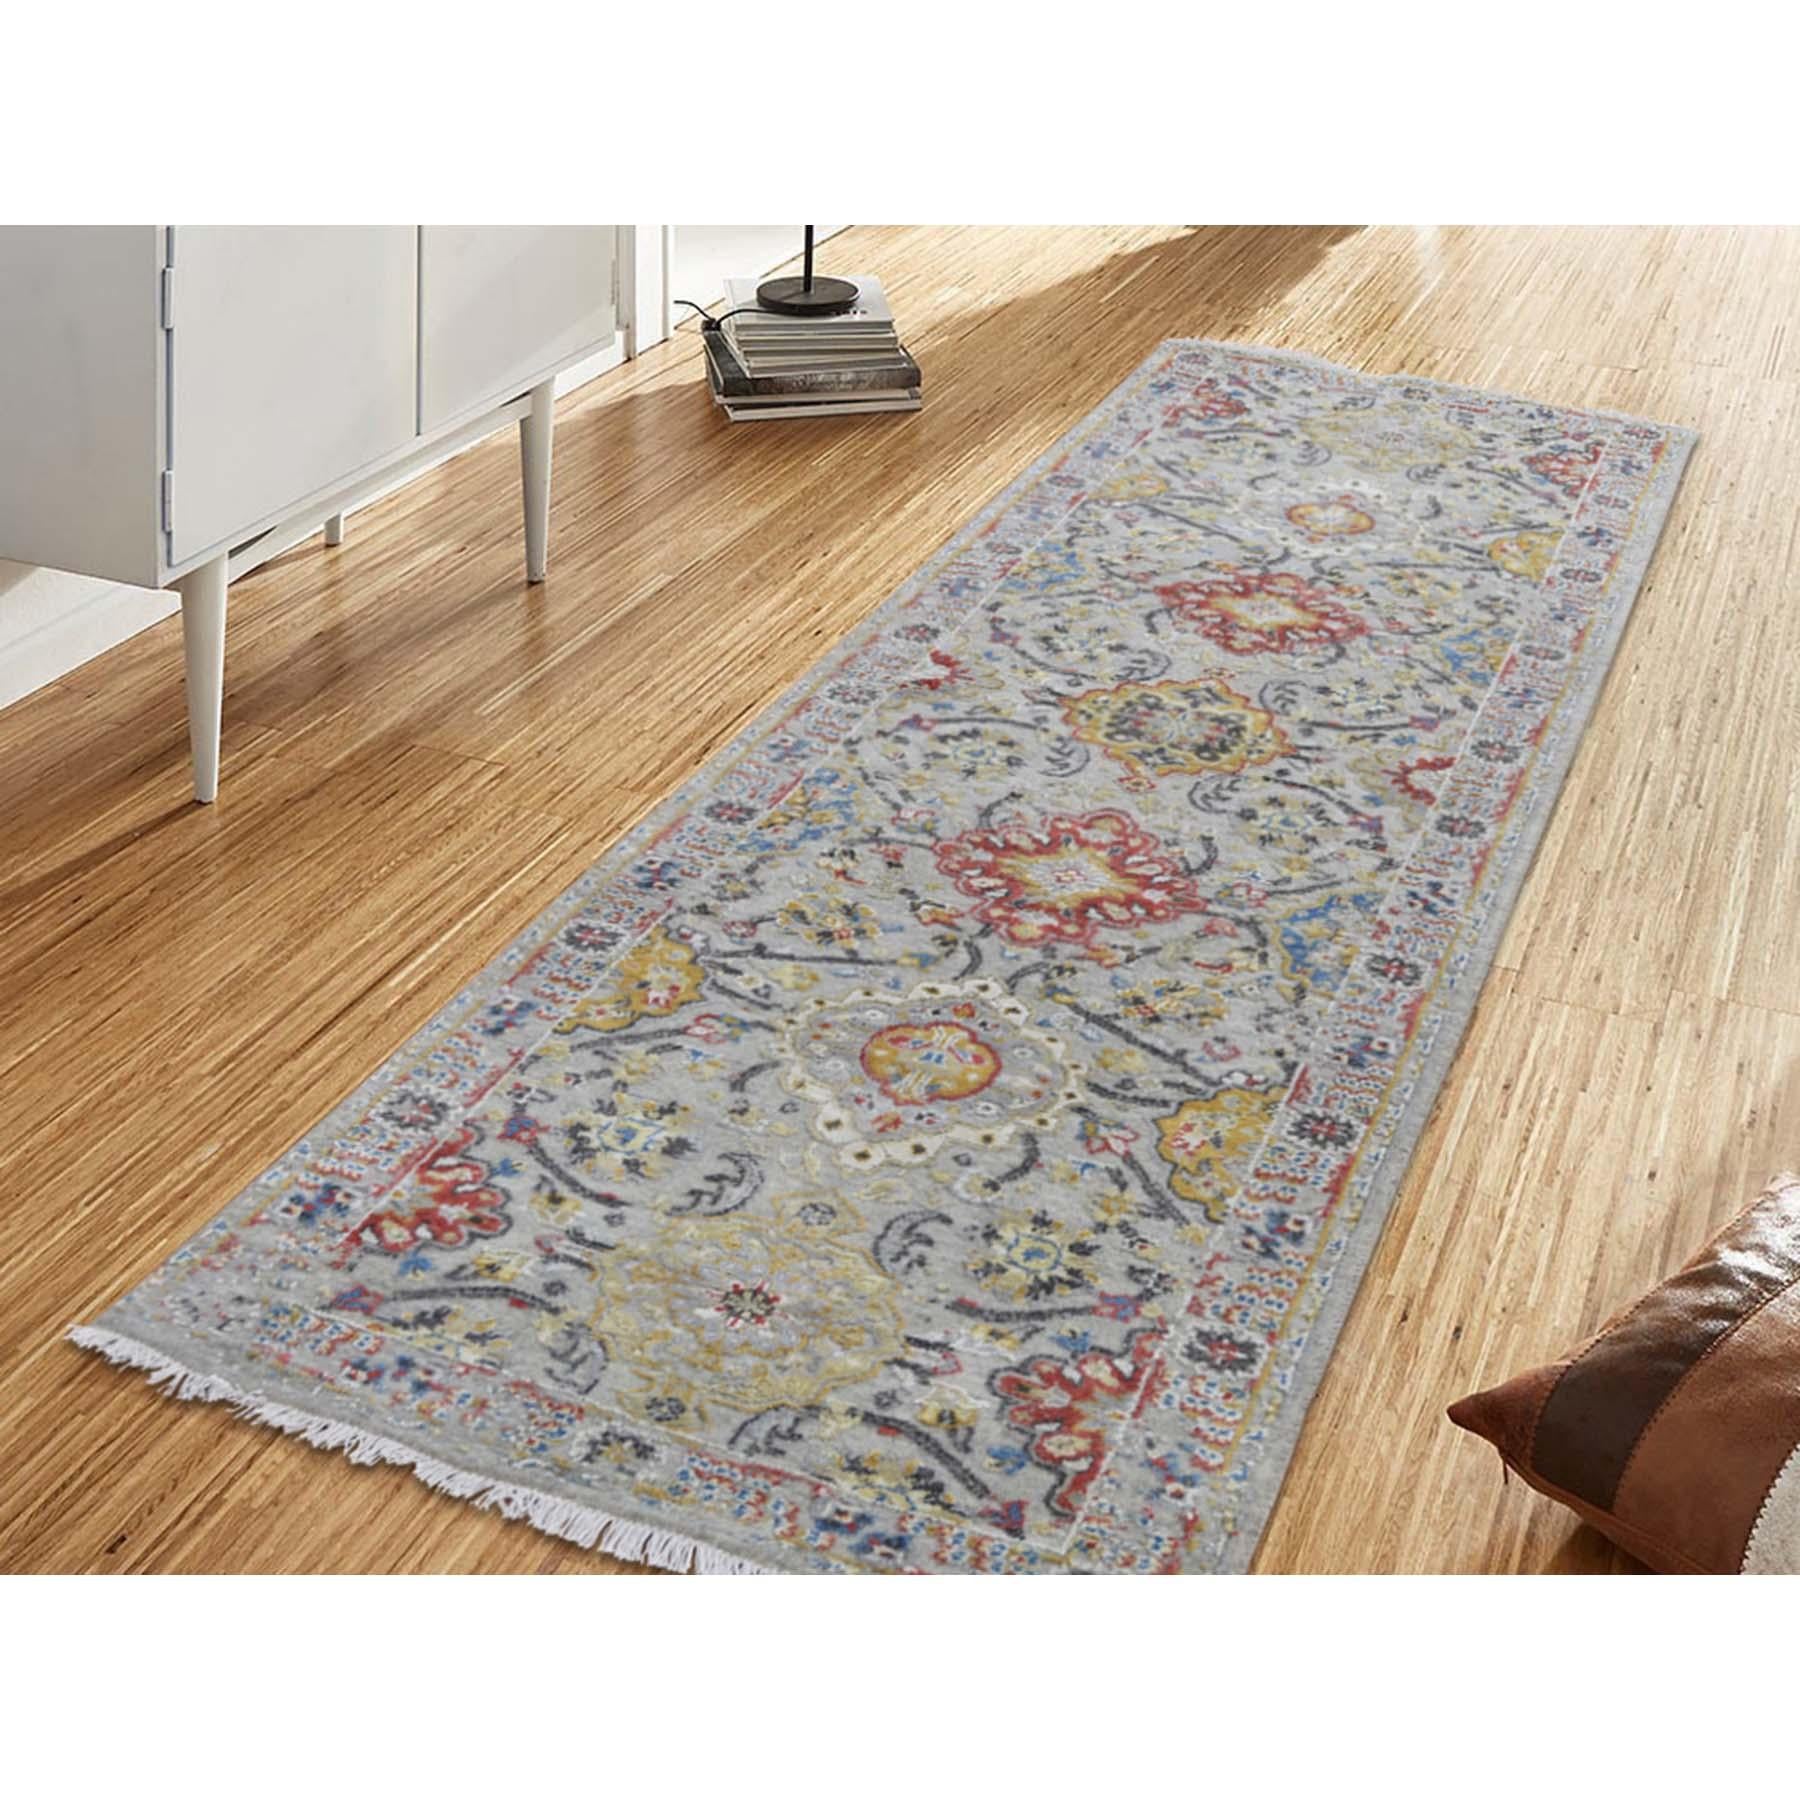 This is a truly genuine one-of-a-kind The Sunset Rosettes pure silk & wool runner hand-knotted oriental rug, 2'7